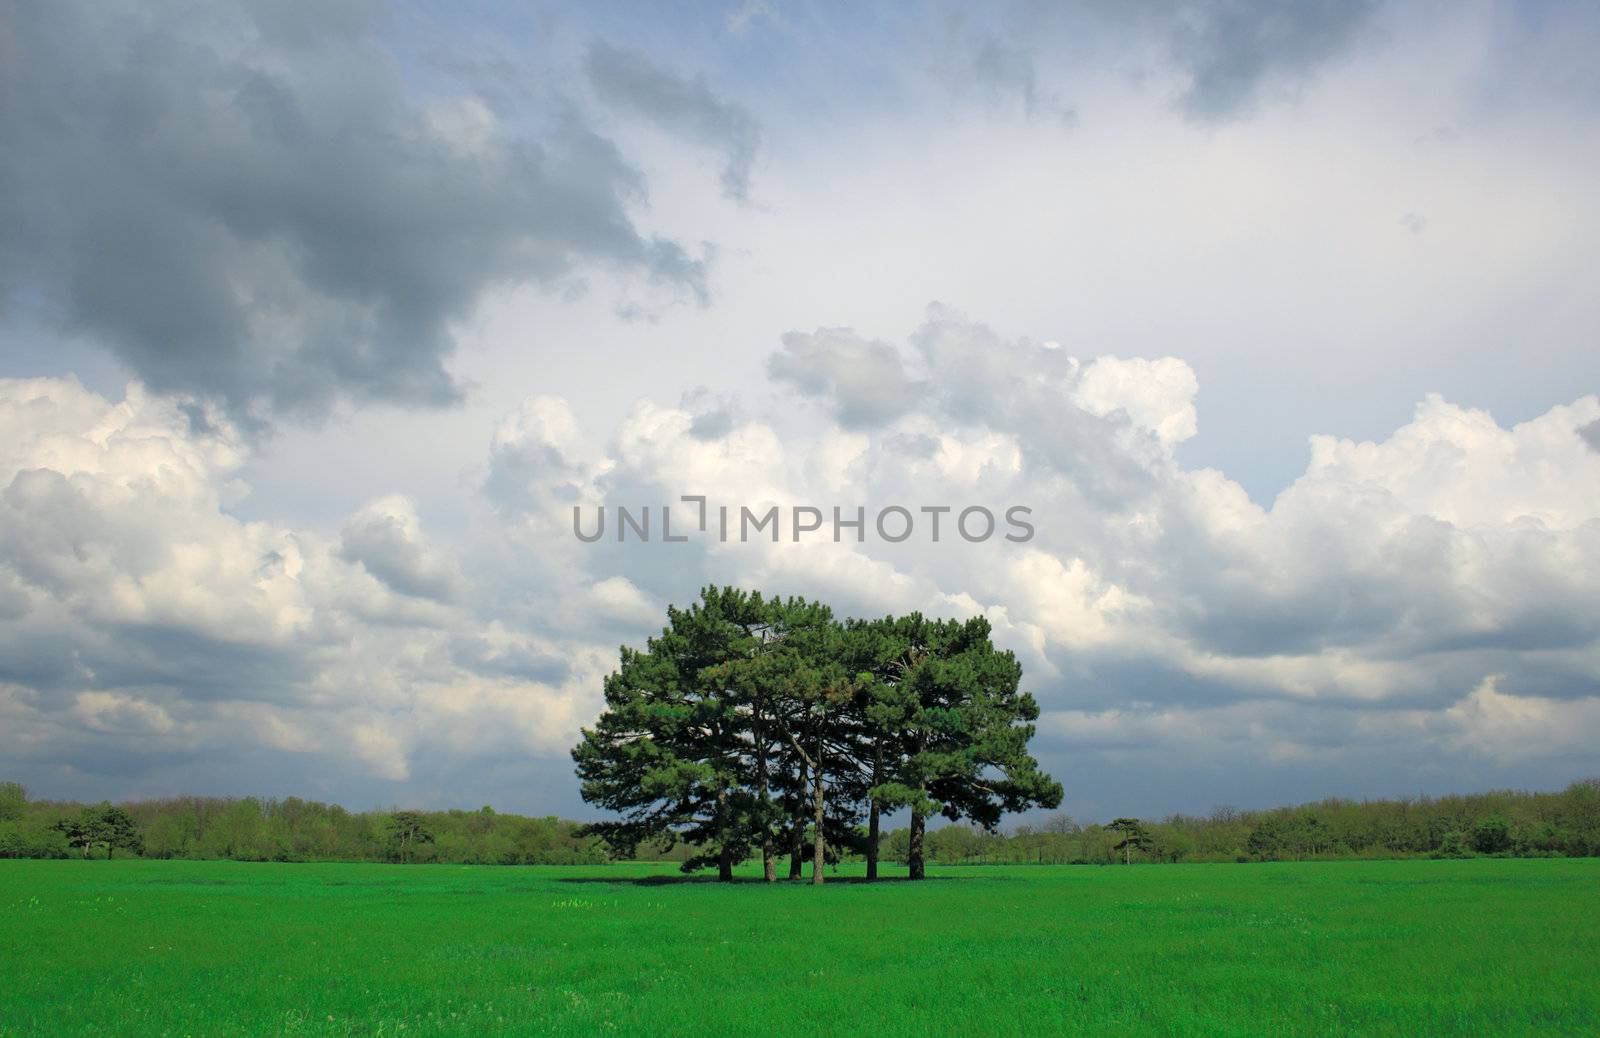 Beautiful landscape with several trees in the center of a green field